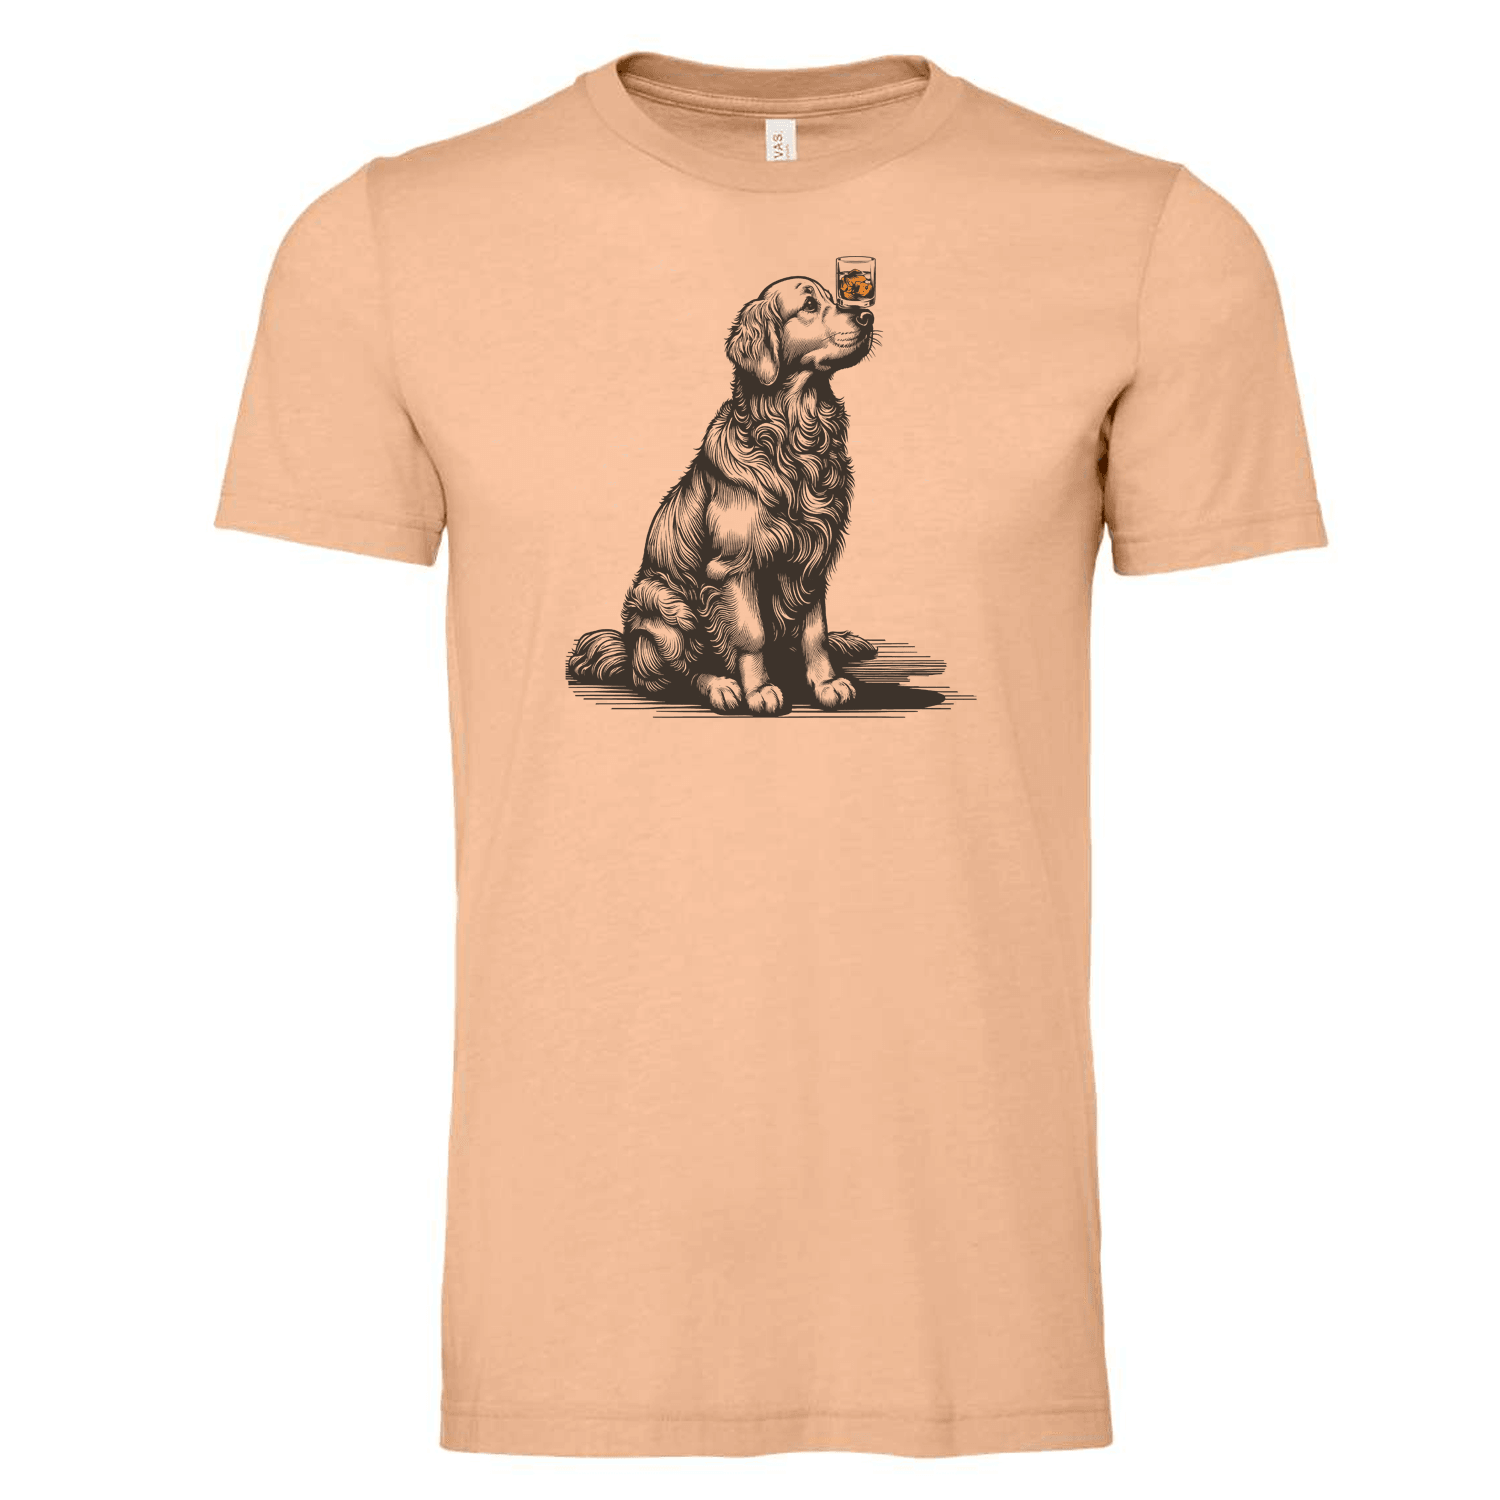 My Dog is Neat T-Shirt - Ales to Trails